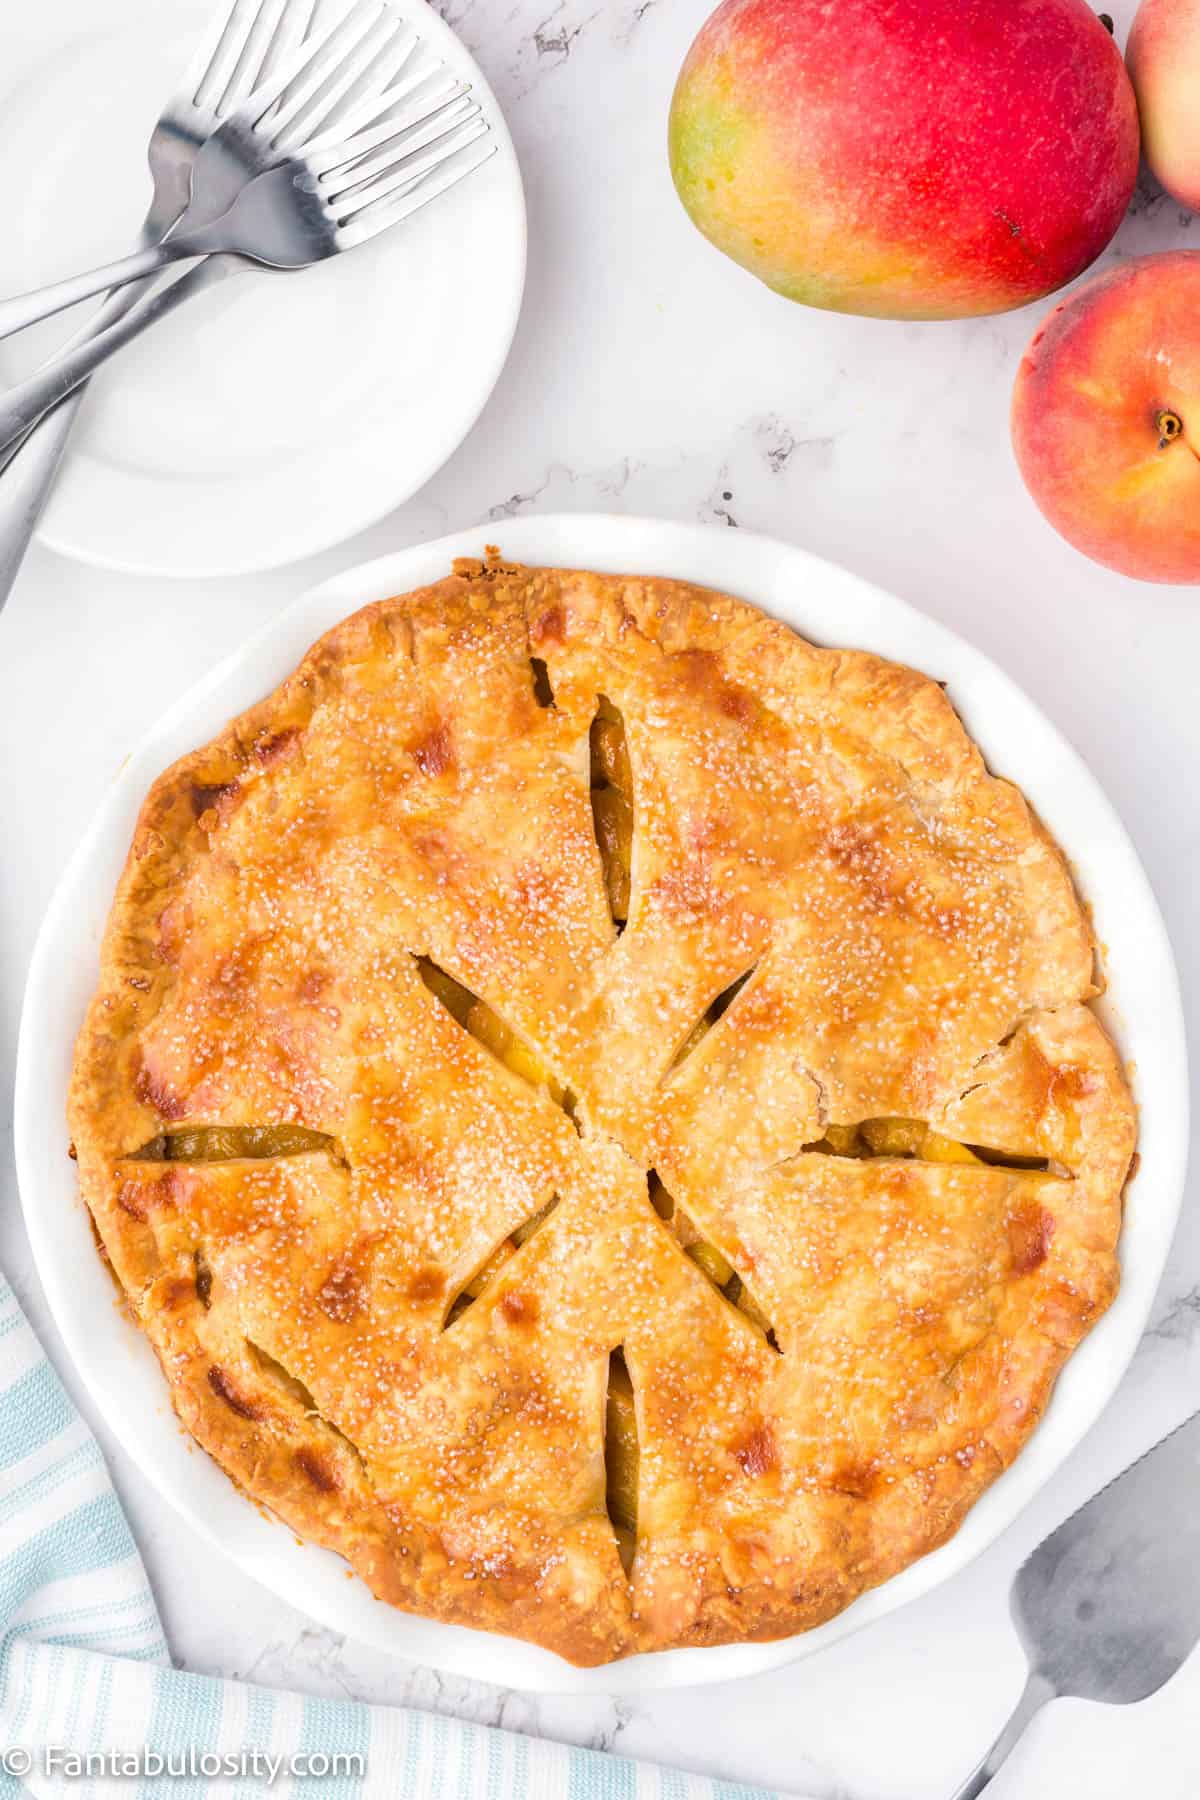 A fully baked peach mango pie sitting on a counter with a nice golden brown crust.